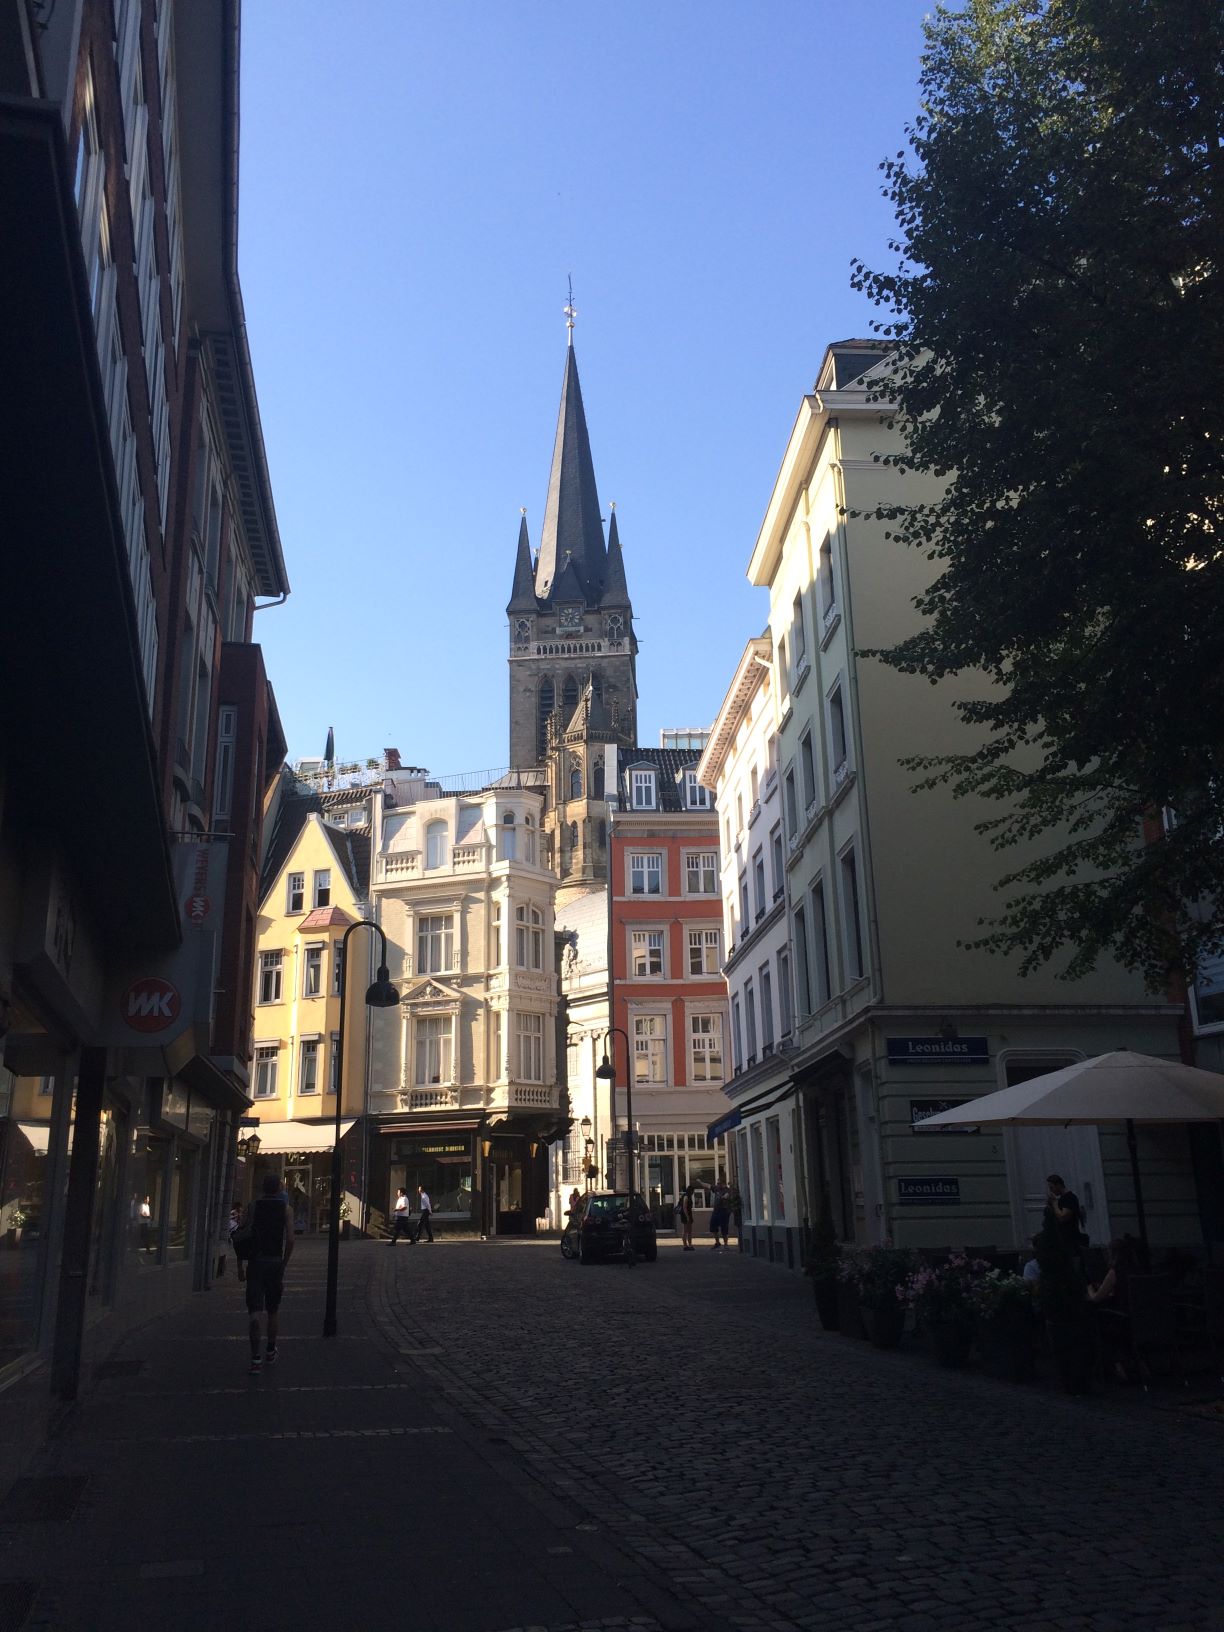 A view of one side of Aachen's cathedral from its old town center.